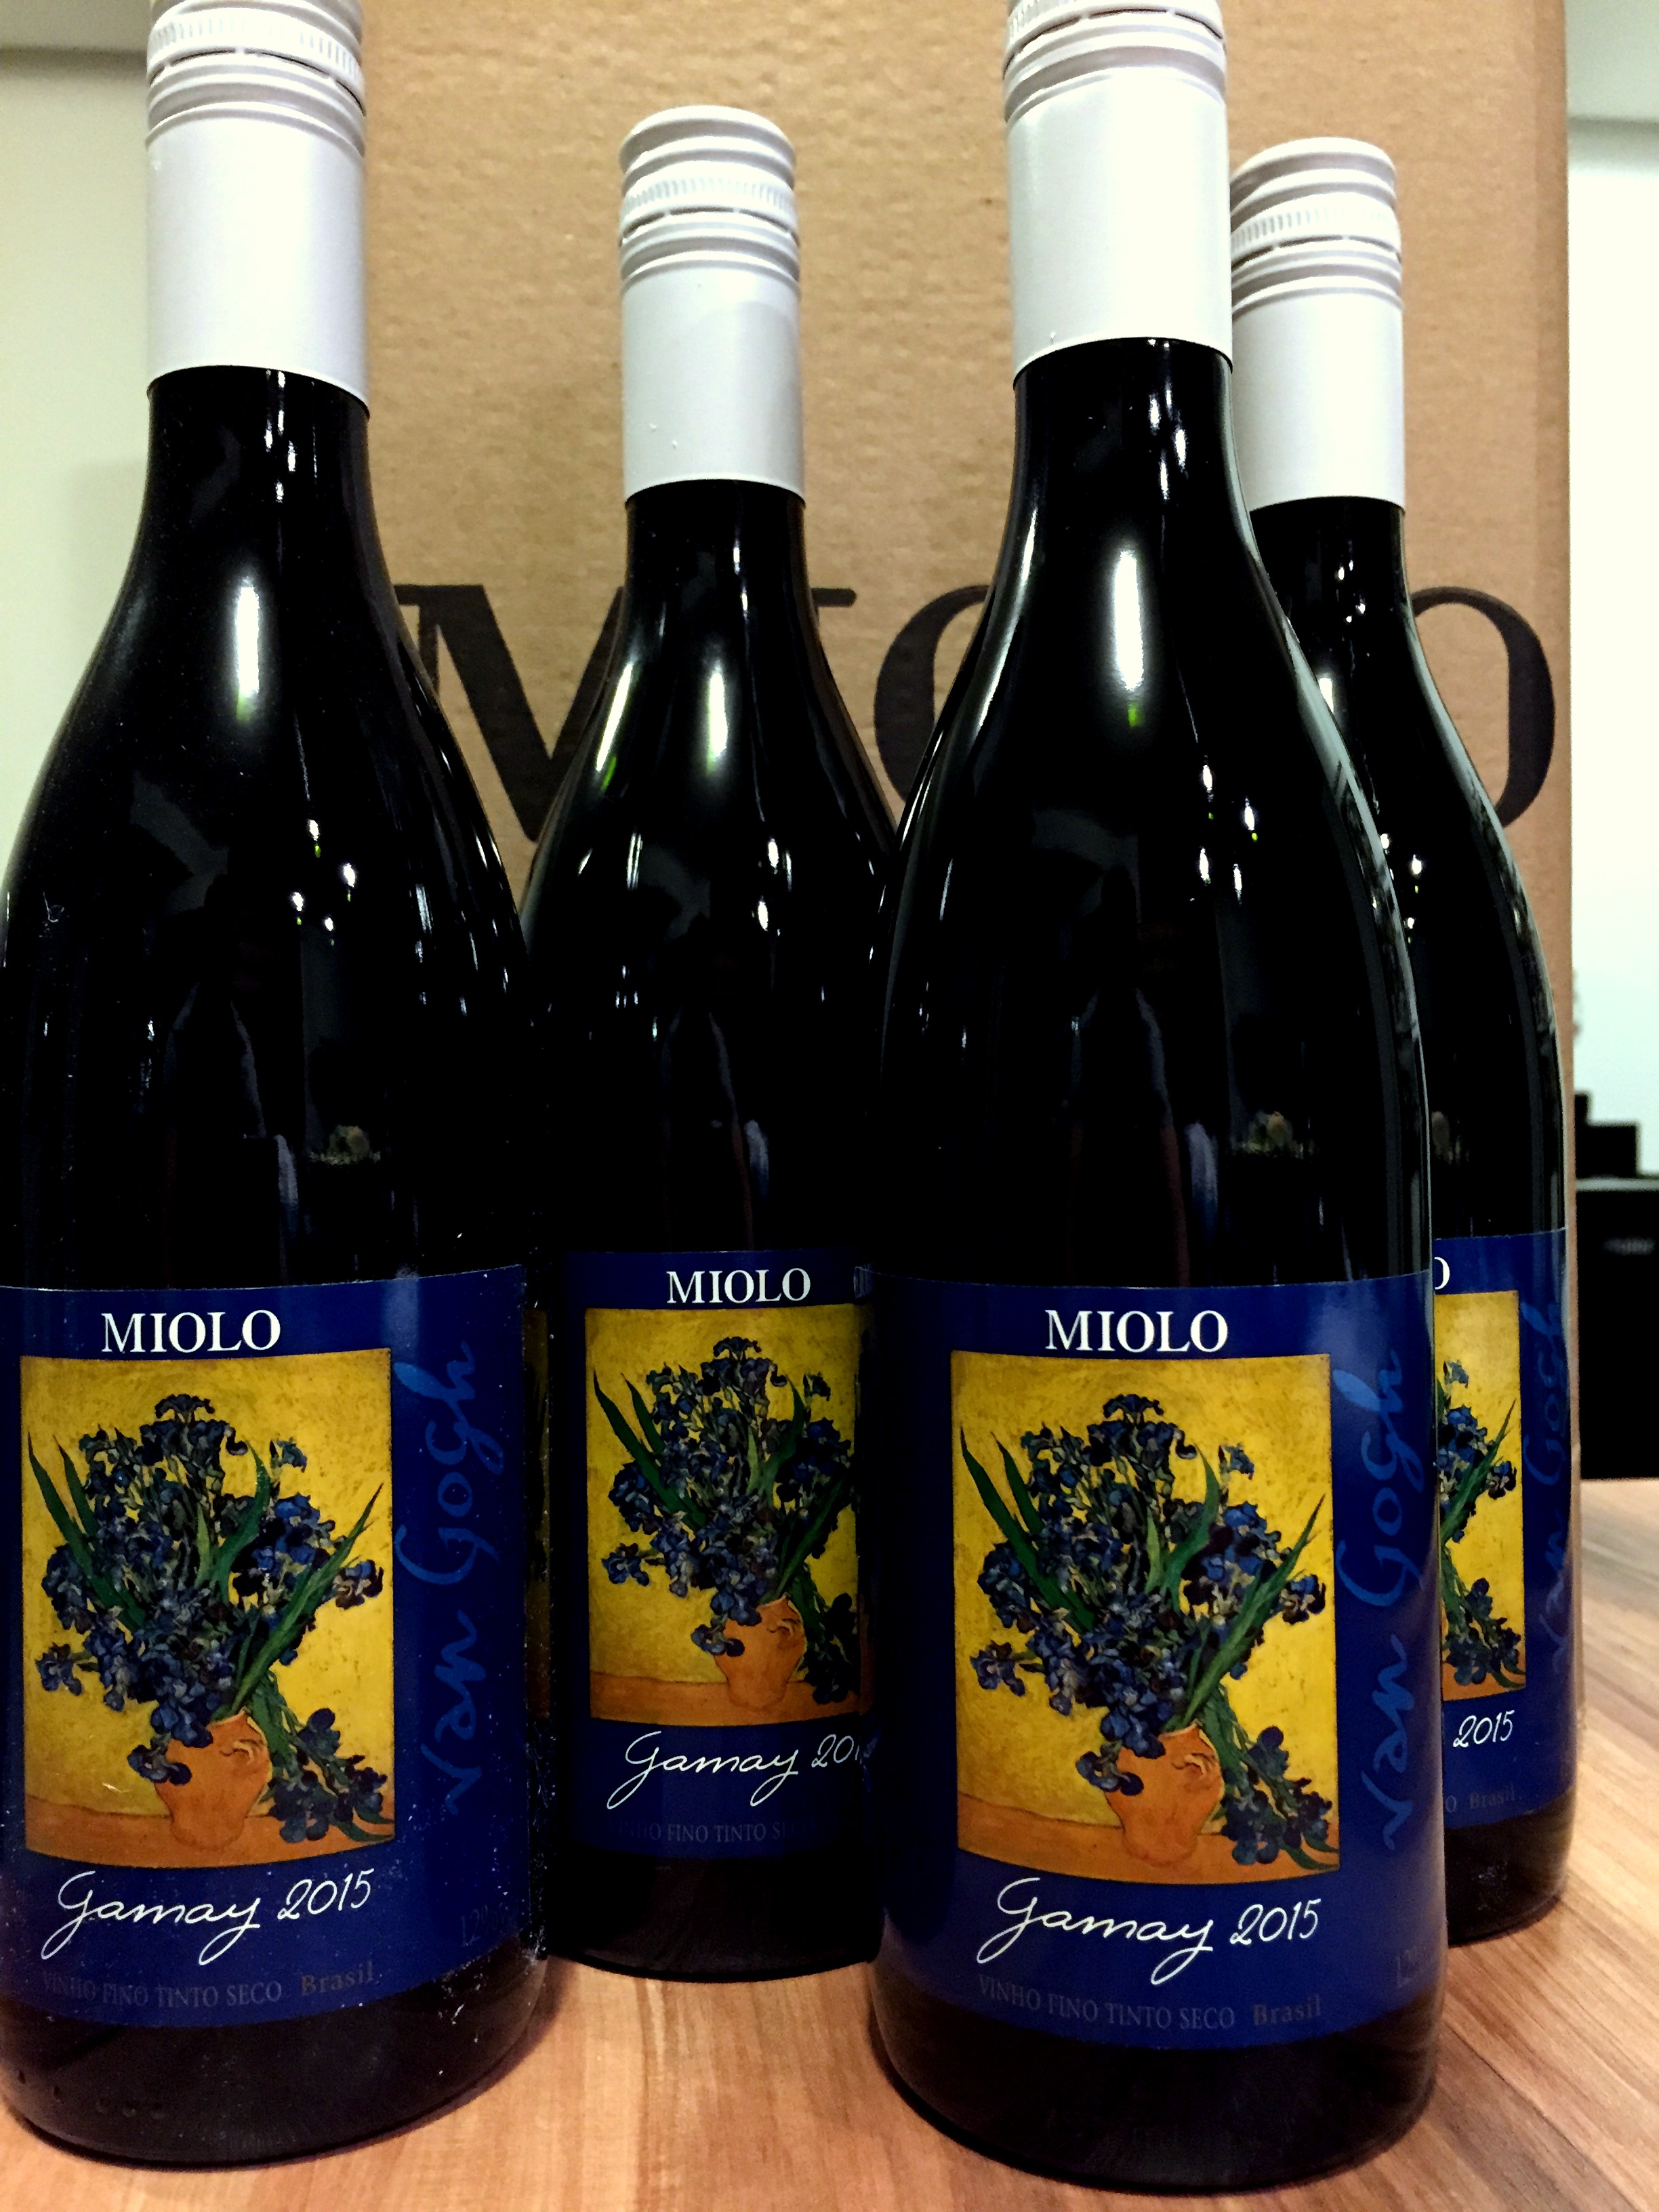 Miolo Gamay 2015